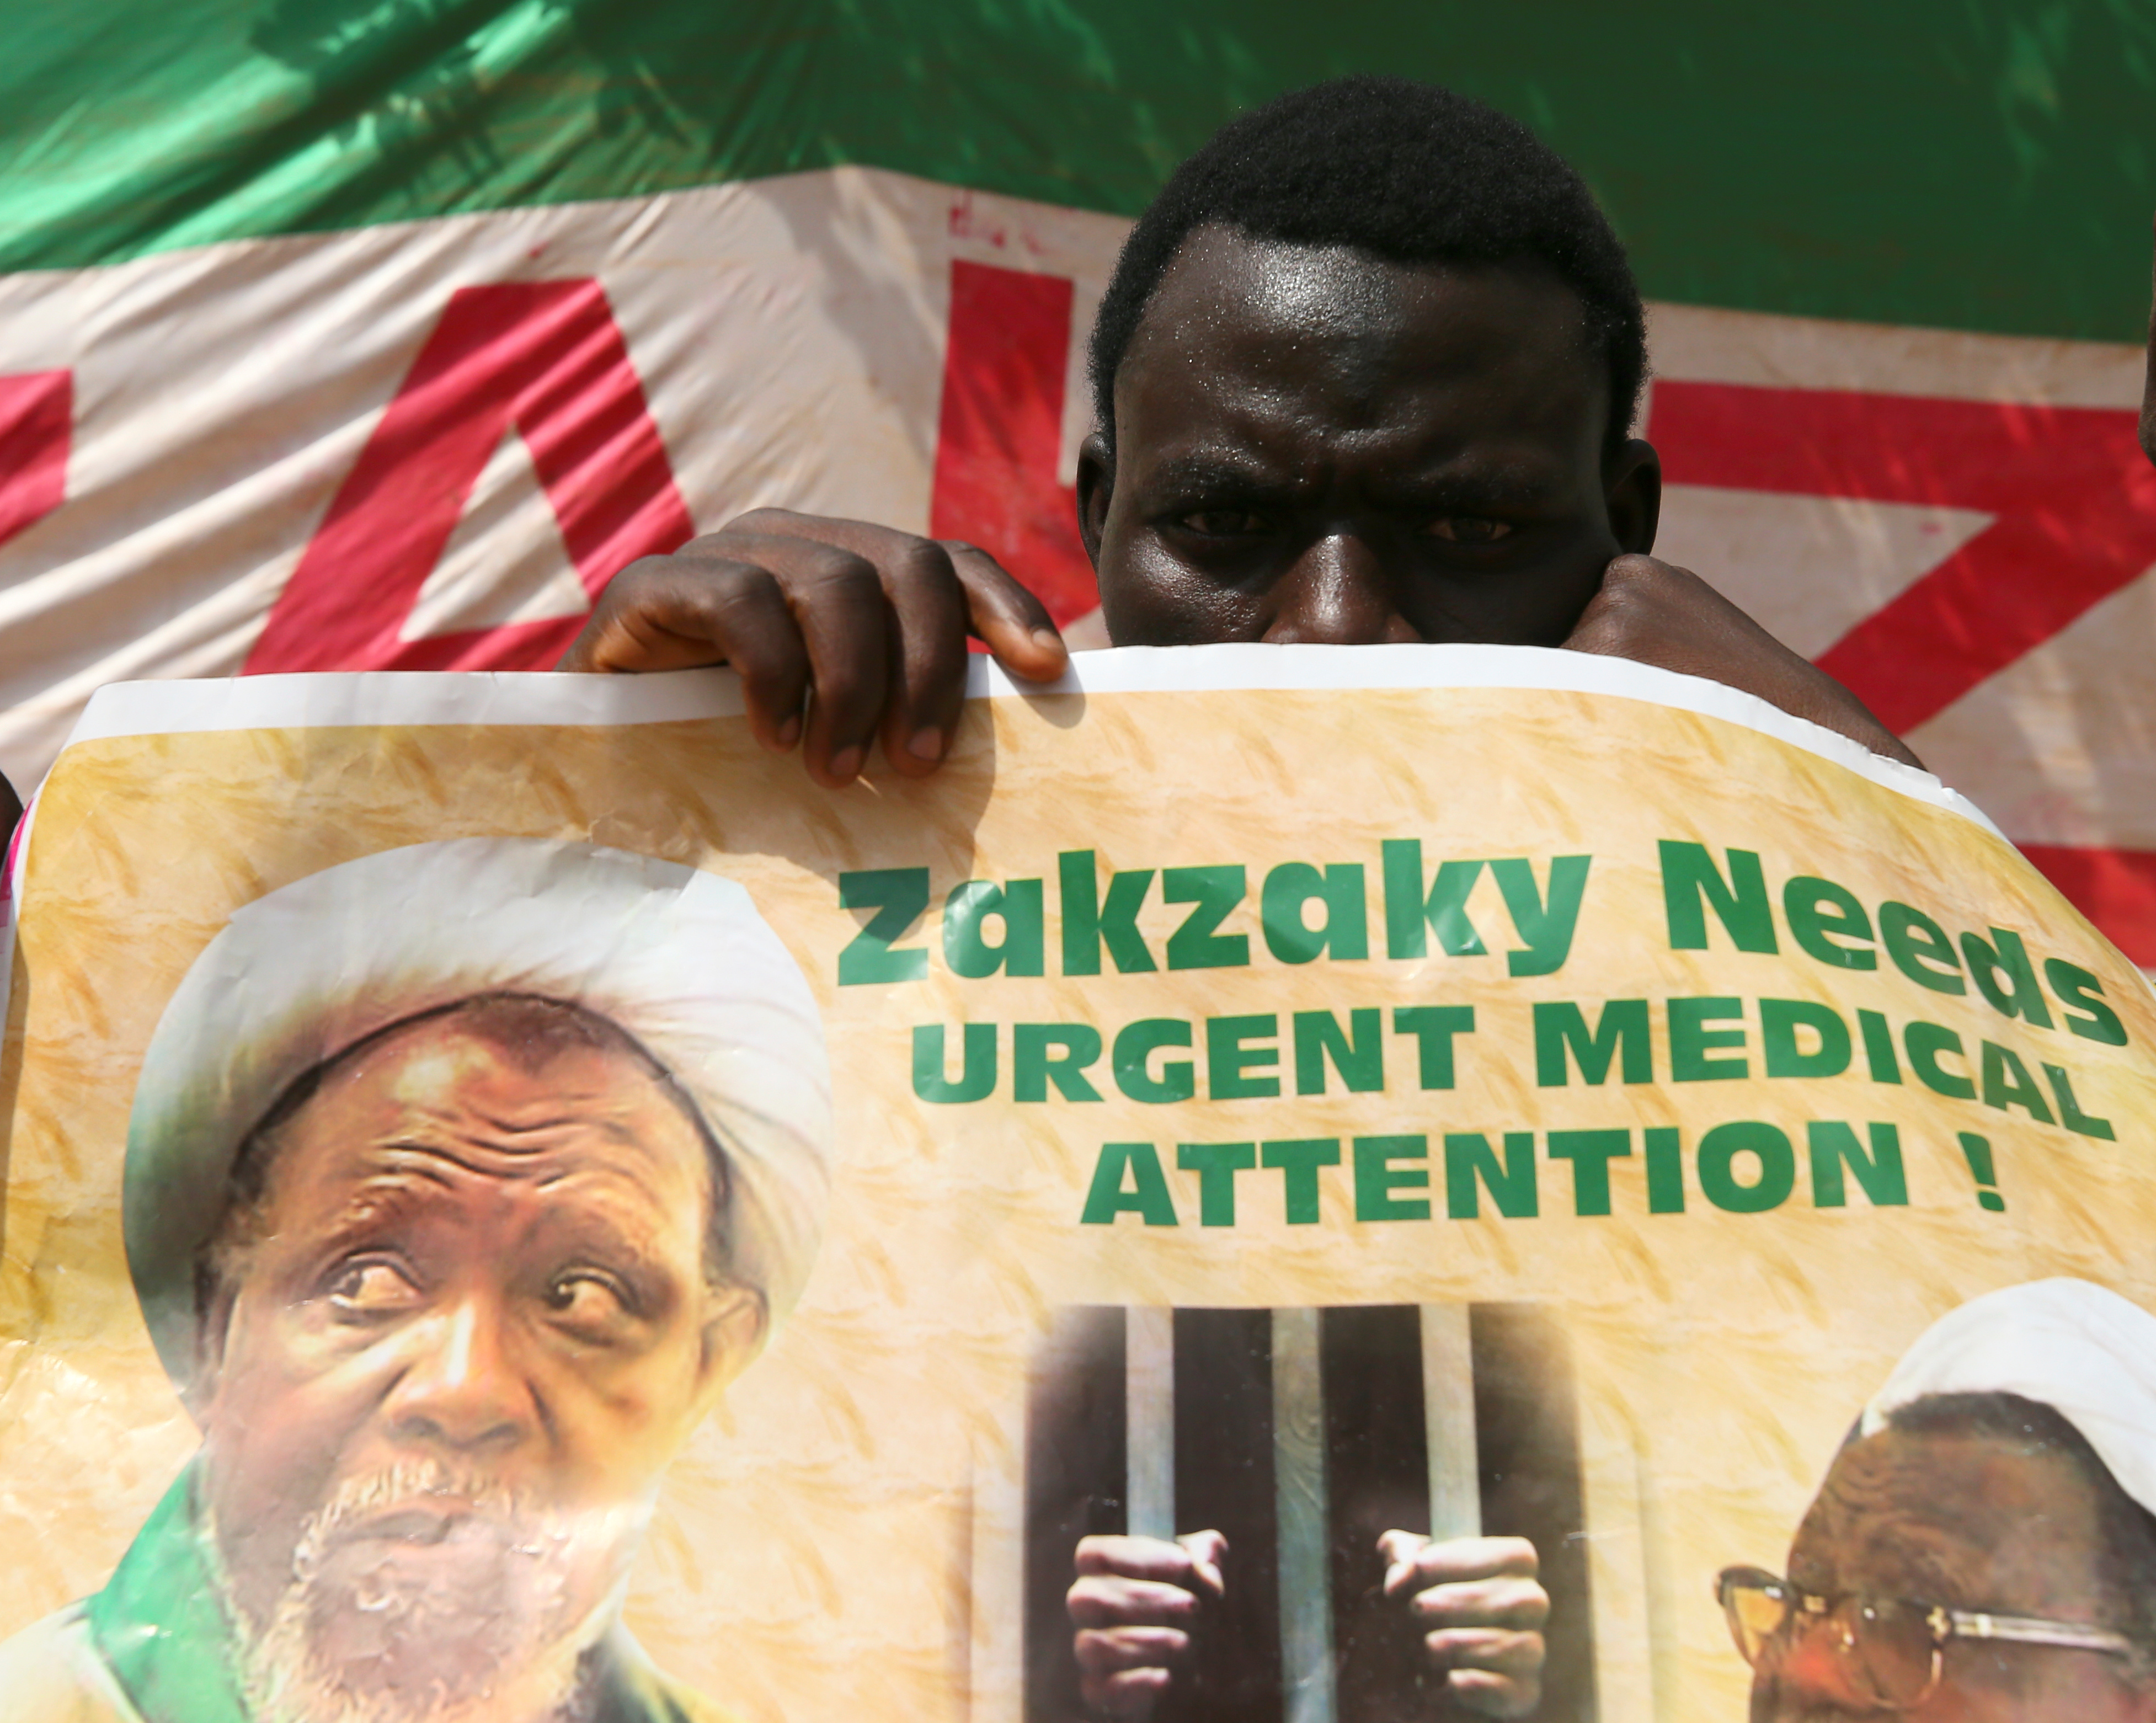 A protester holds banner calling for the release of Sheikh Ibrahim Zakzaky in Abuja